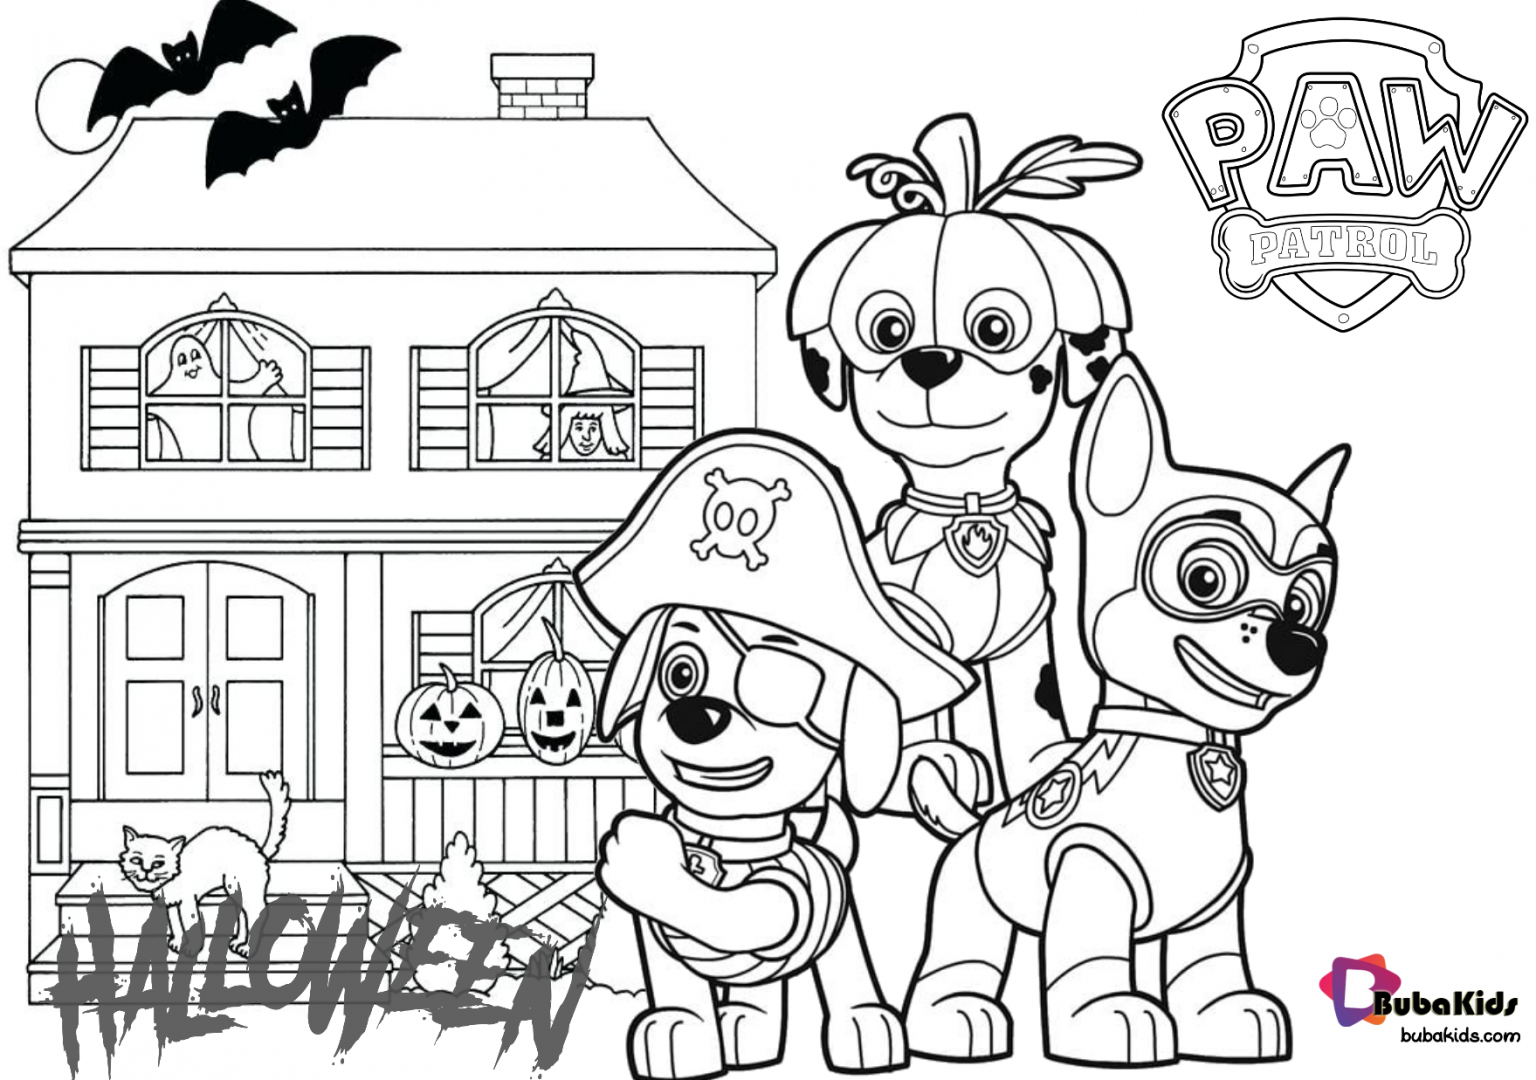 paw-patrol-halloween-haunted-house-coloring-pages-bubakids